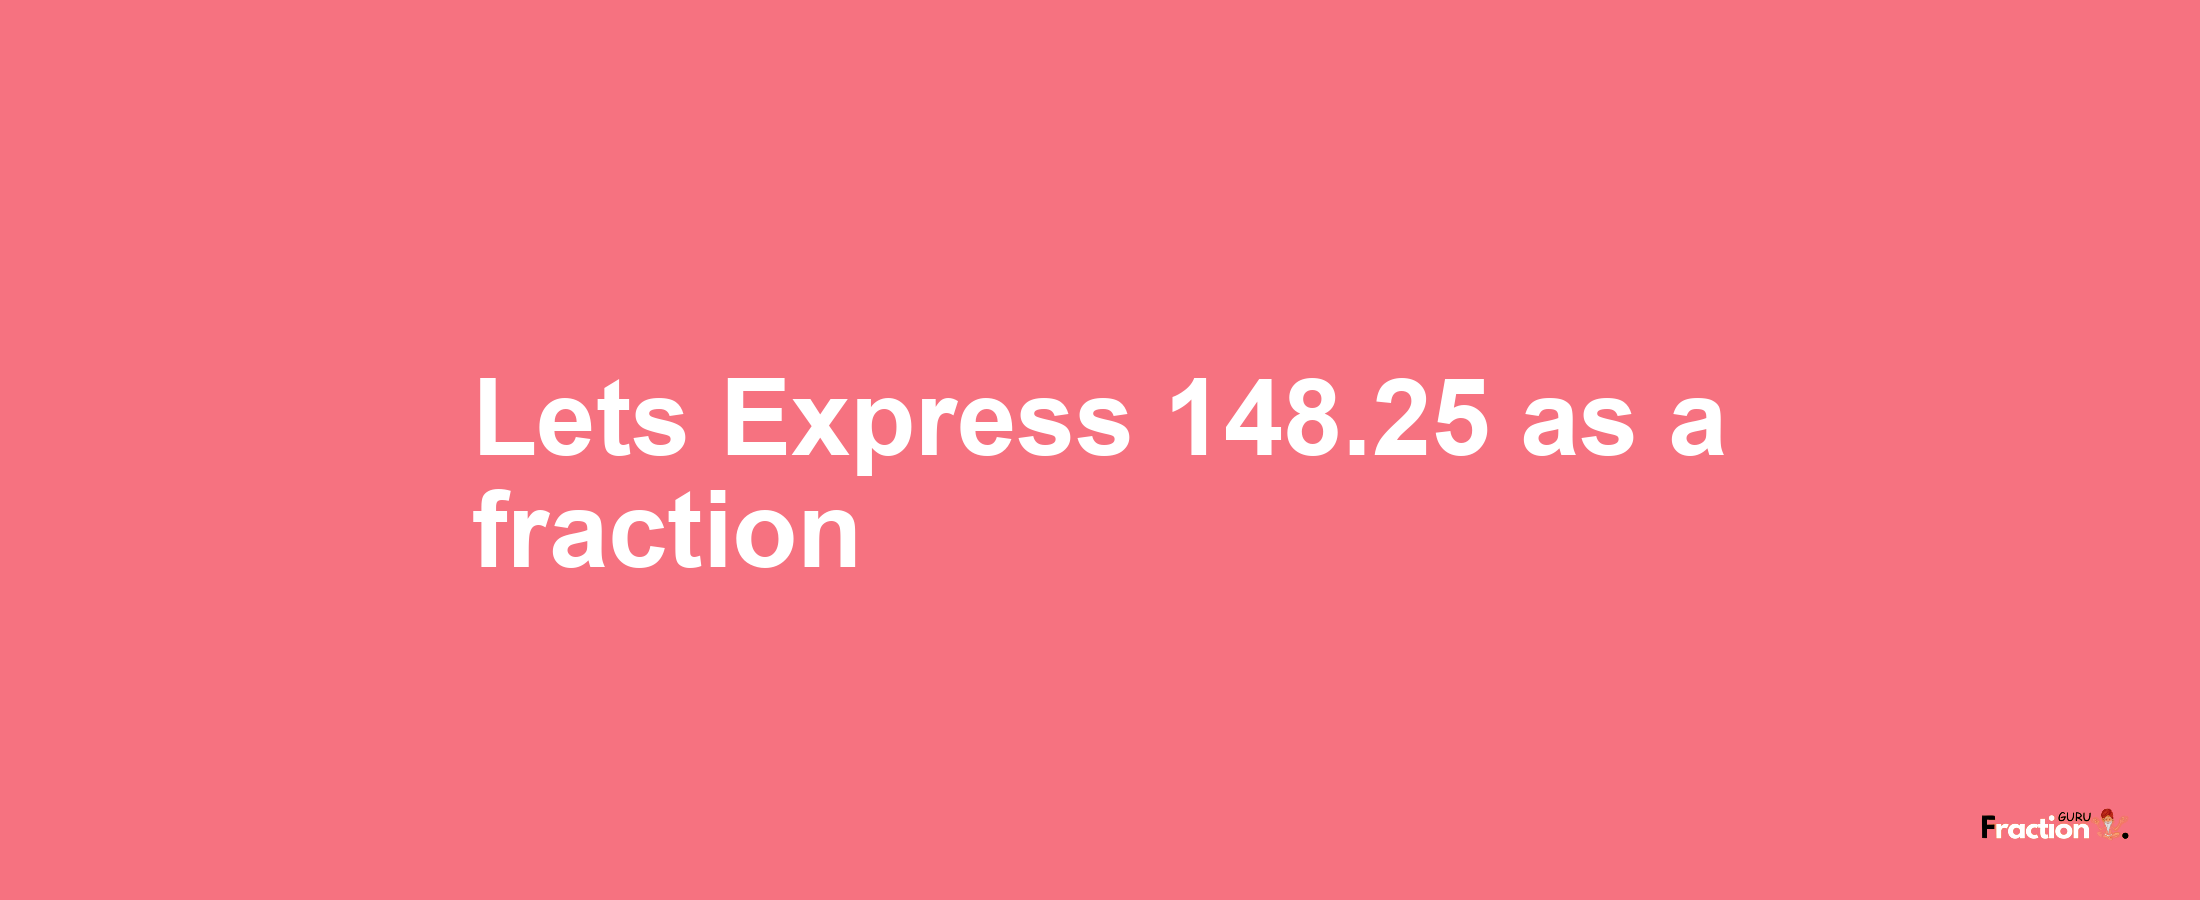 Lets Express 148.25 as afraction